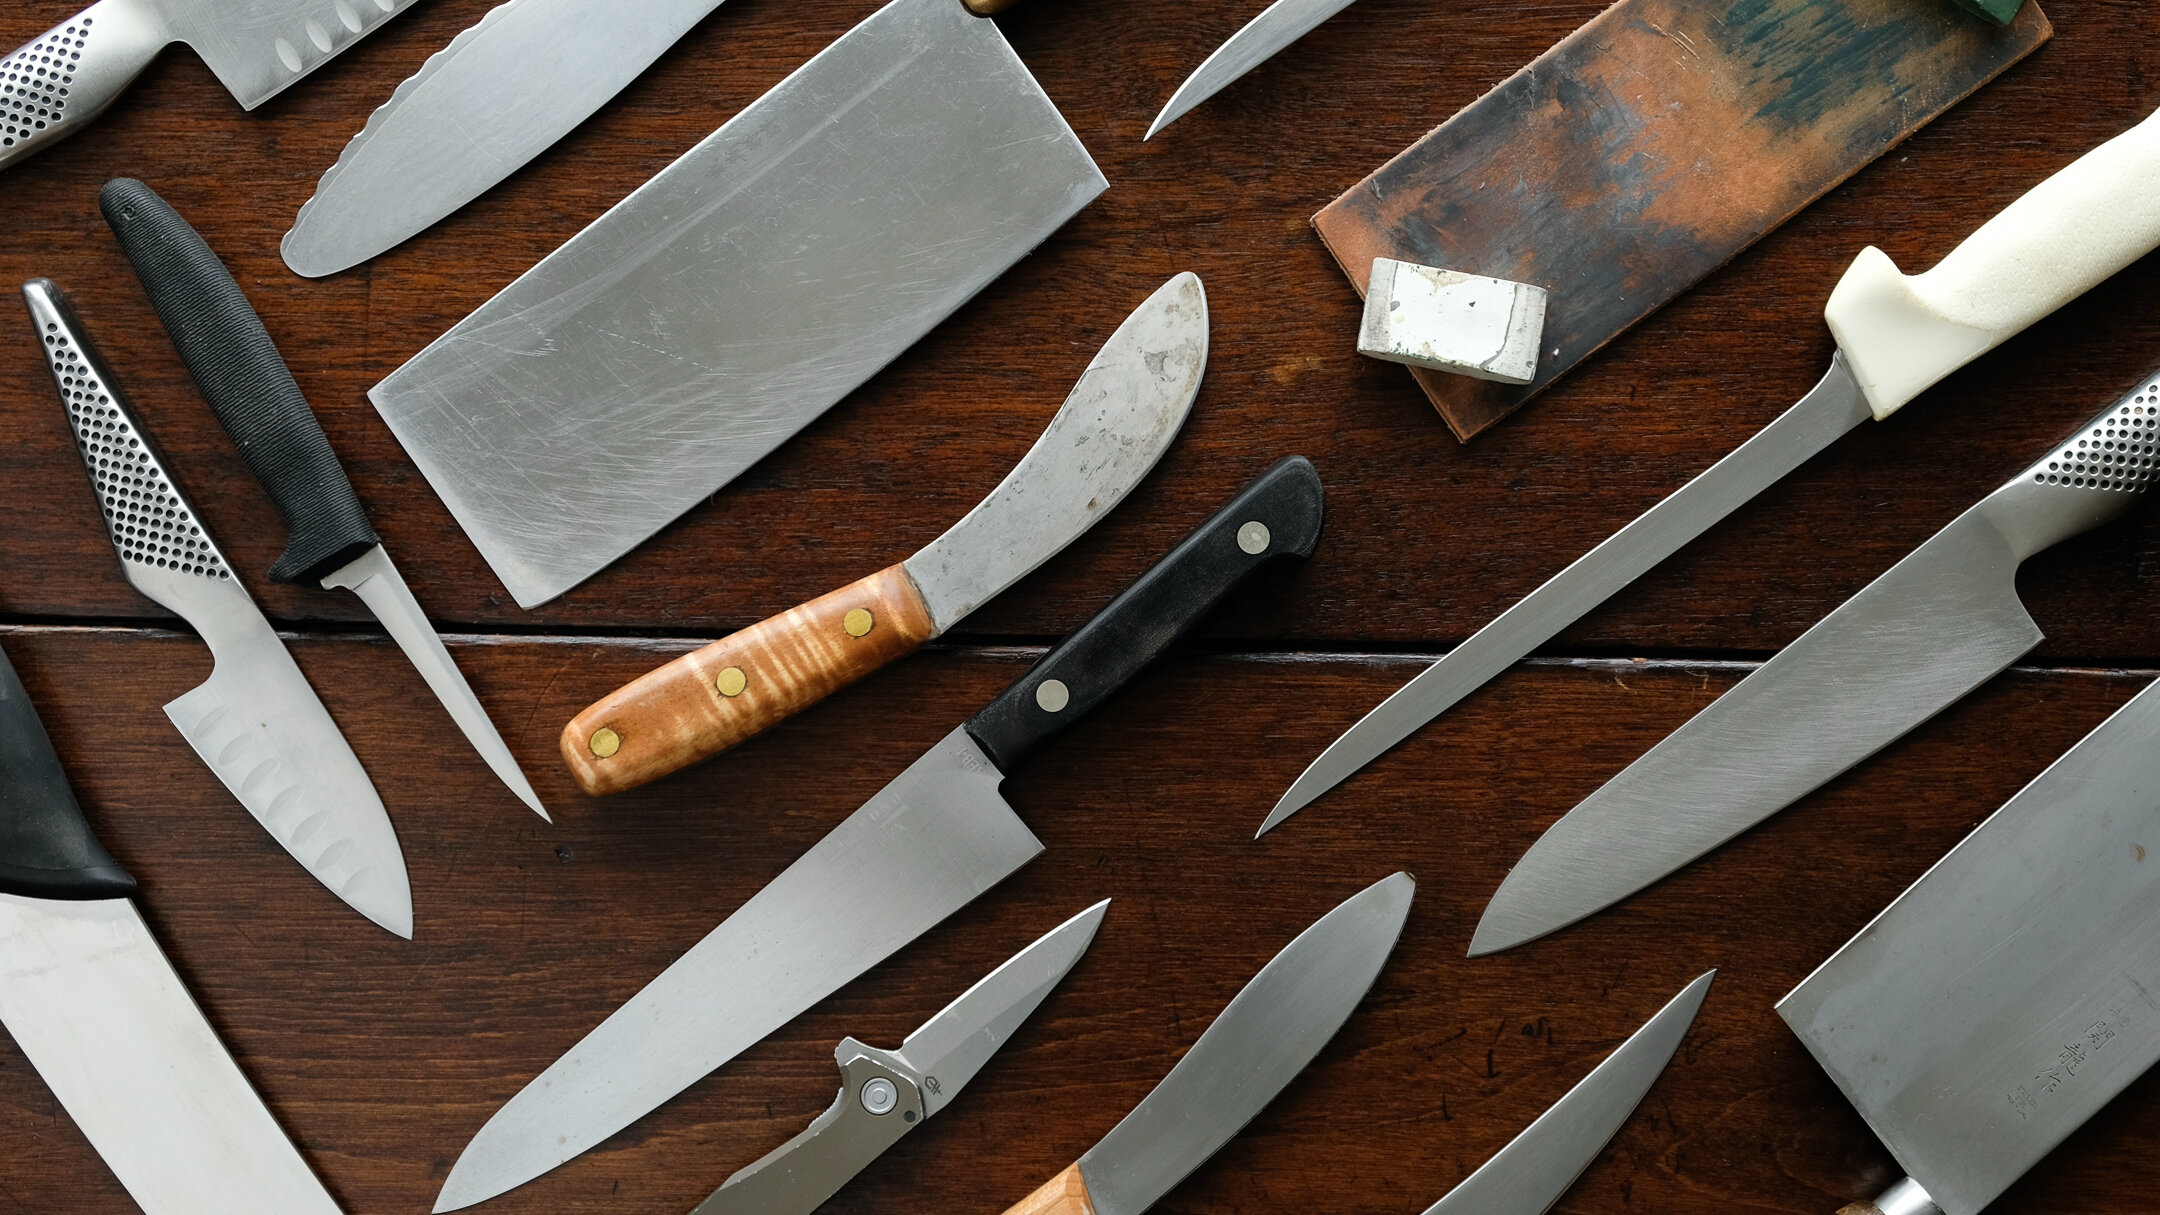 A secret to sharpening a knife to the sharpest it can be is to